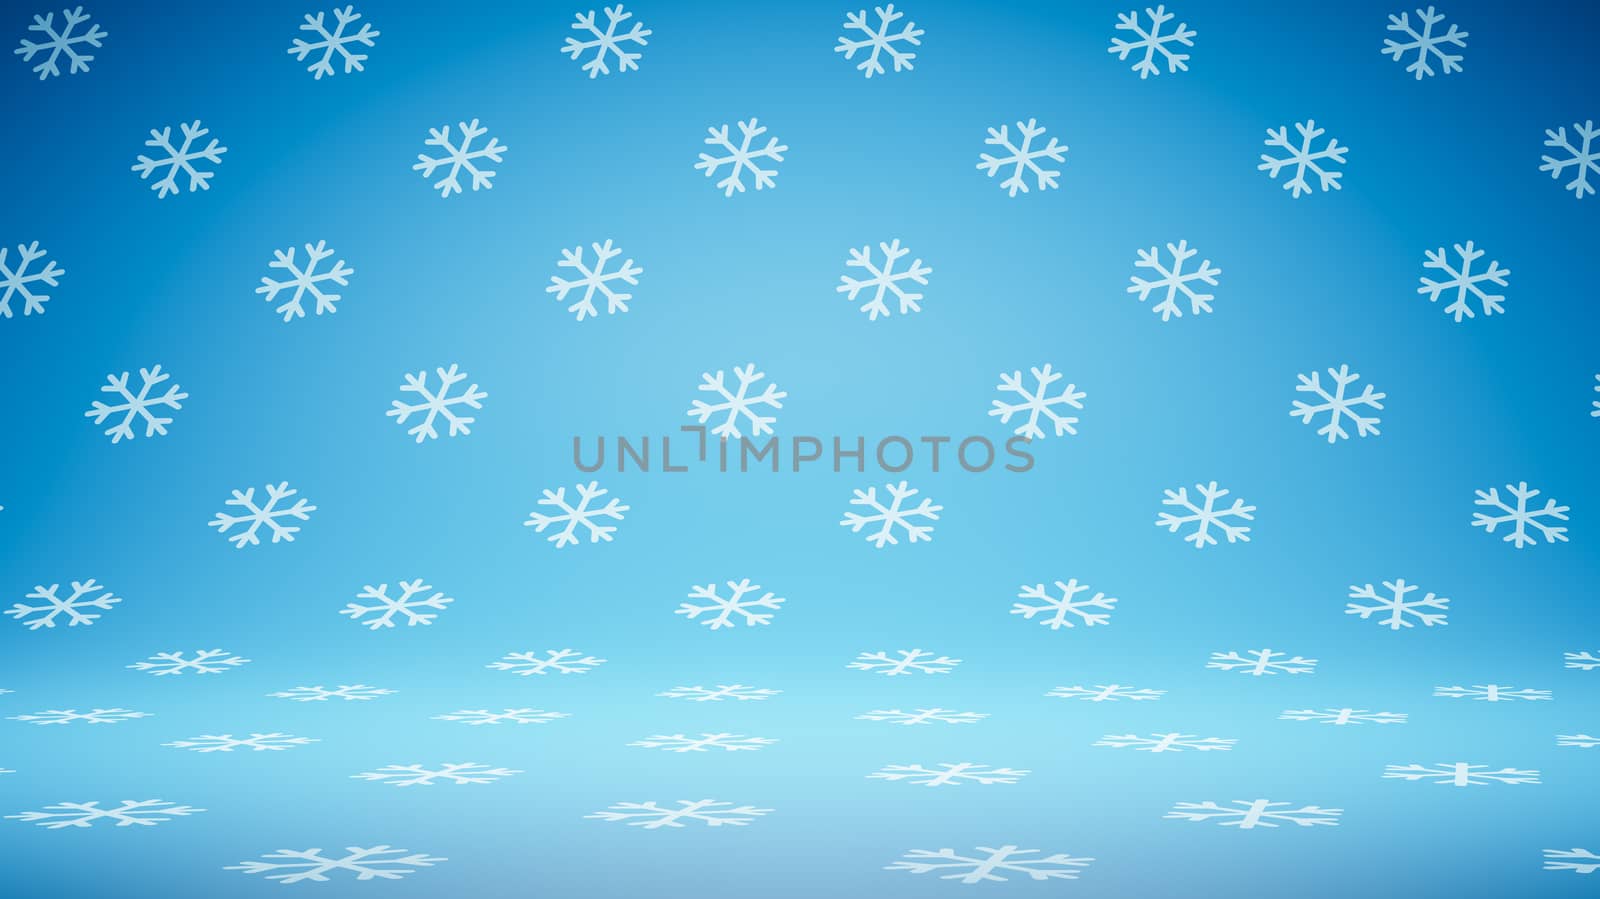 Empty Blank Blue and White Snowflakes Pattern Studio Background 3D Render Illustration